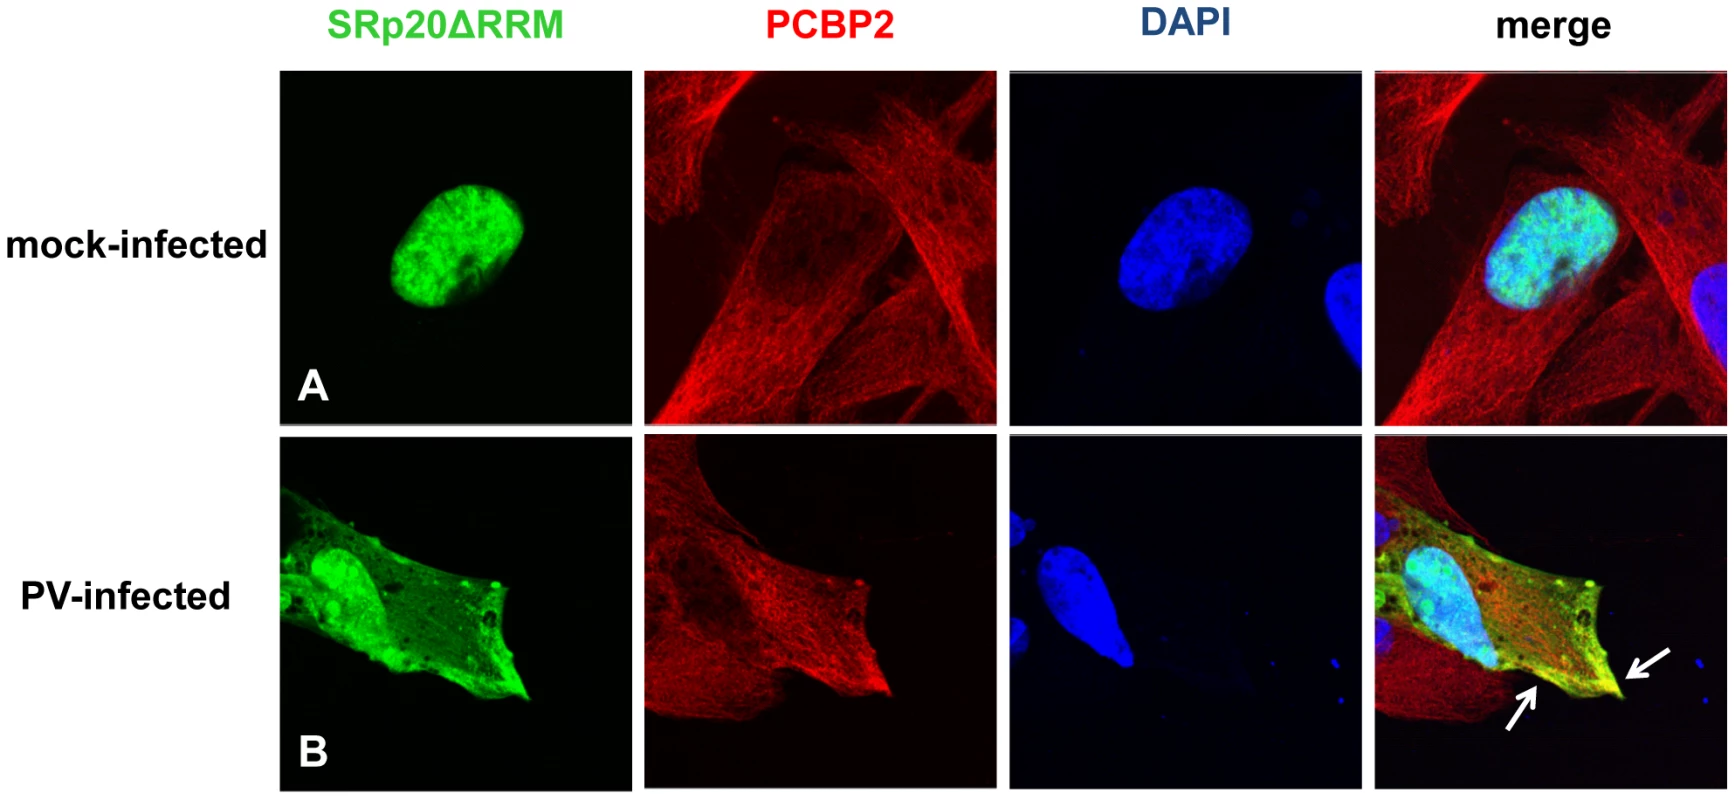 SRp20ΔRRM partial co-localization with PCBP2 in the cytoplasm of poliovirus-infected SK-N-SH cells.